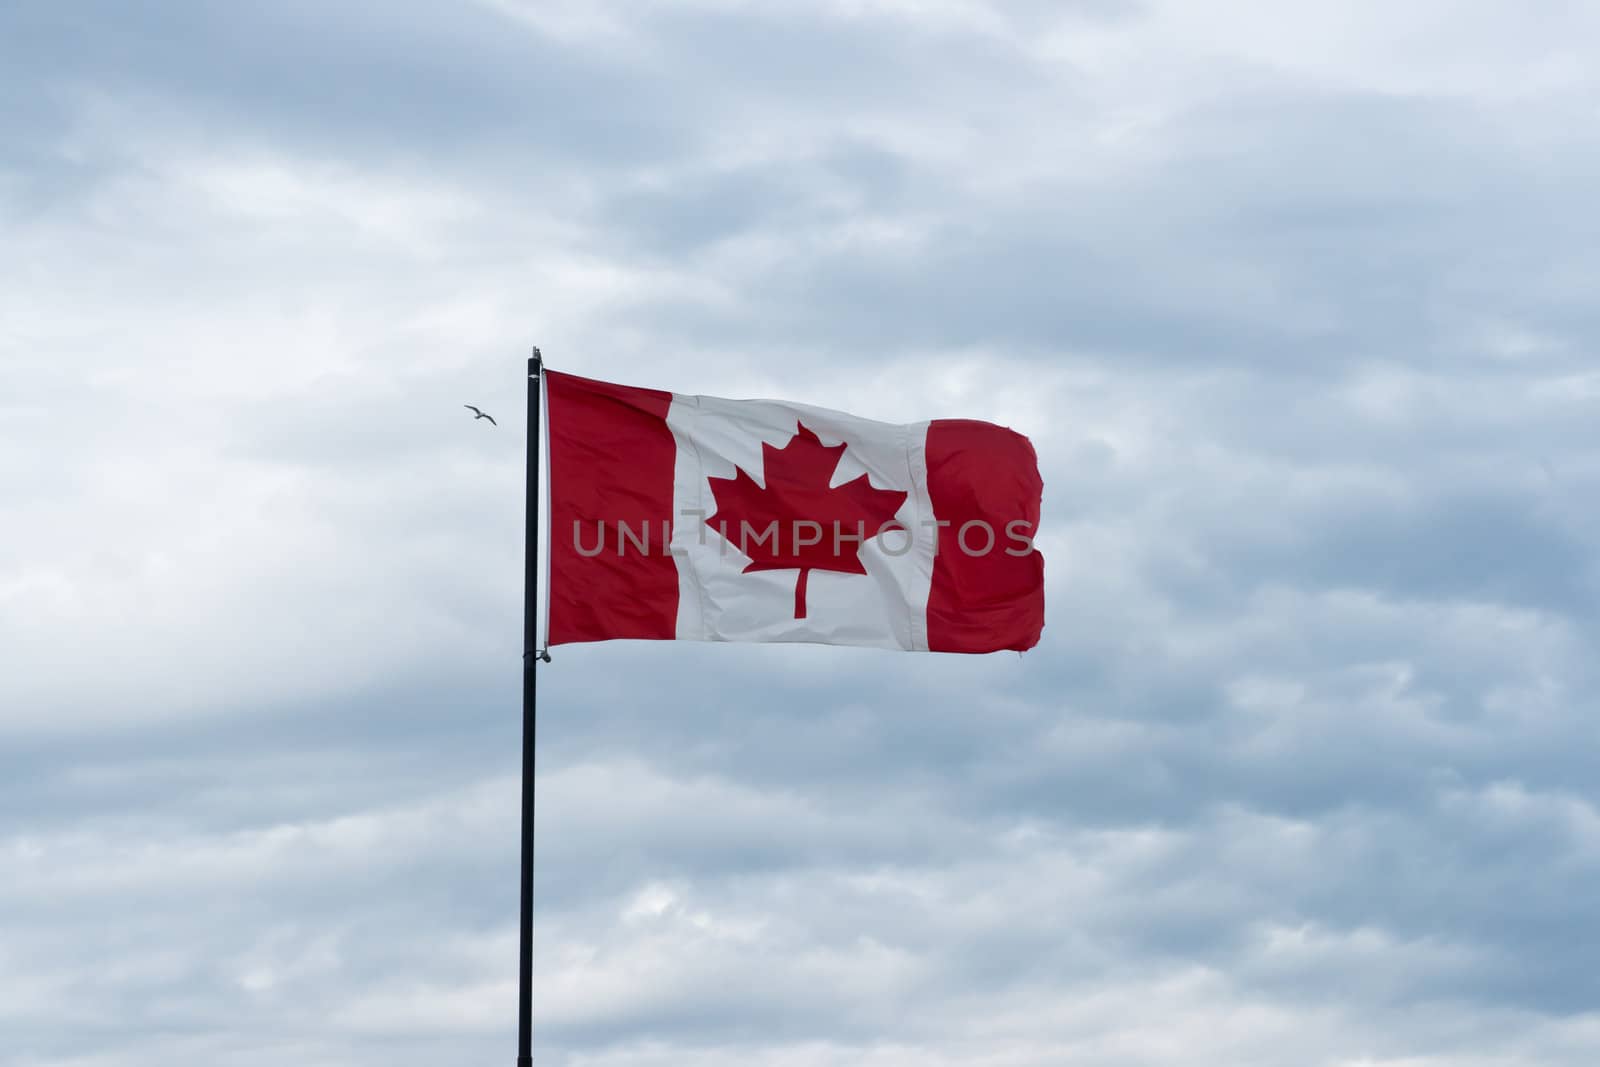 cloudscape view on Bird flying over canadian flag